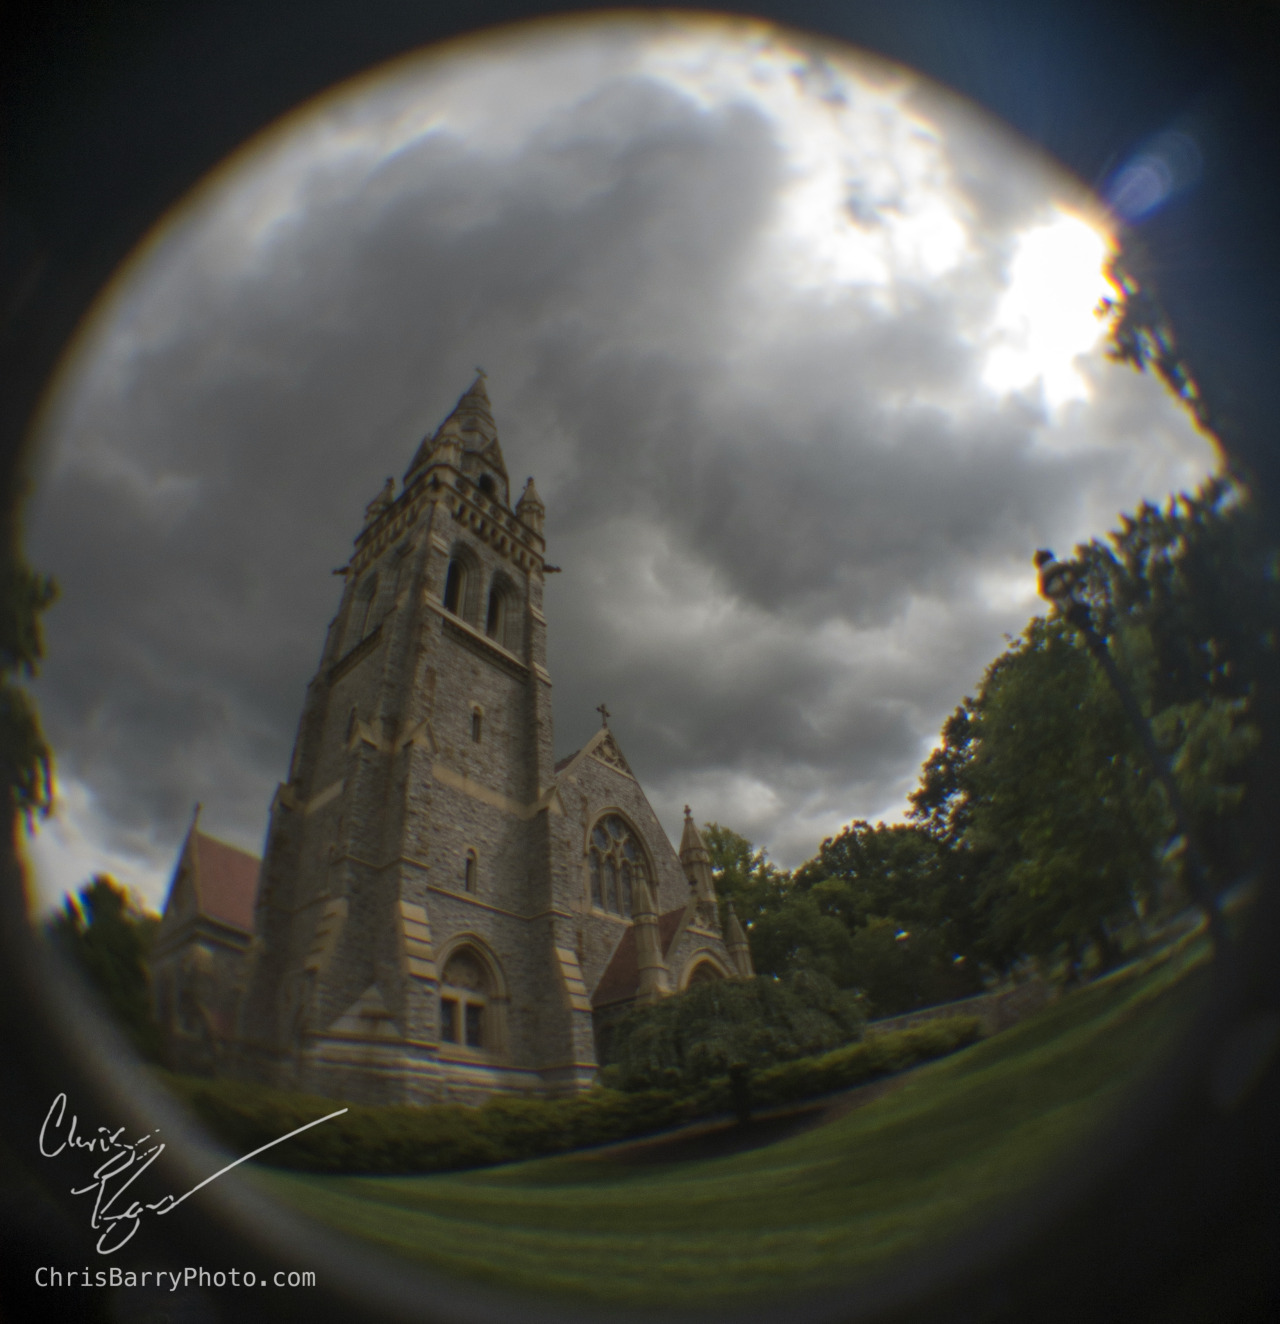 And finishing the fisheyes with Packer Memorial Church